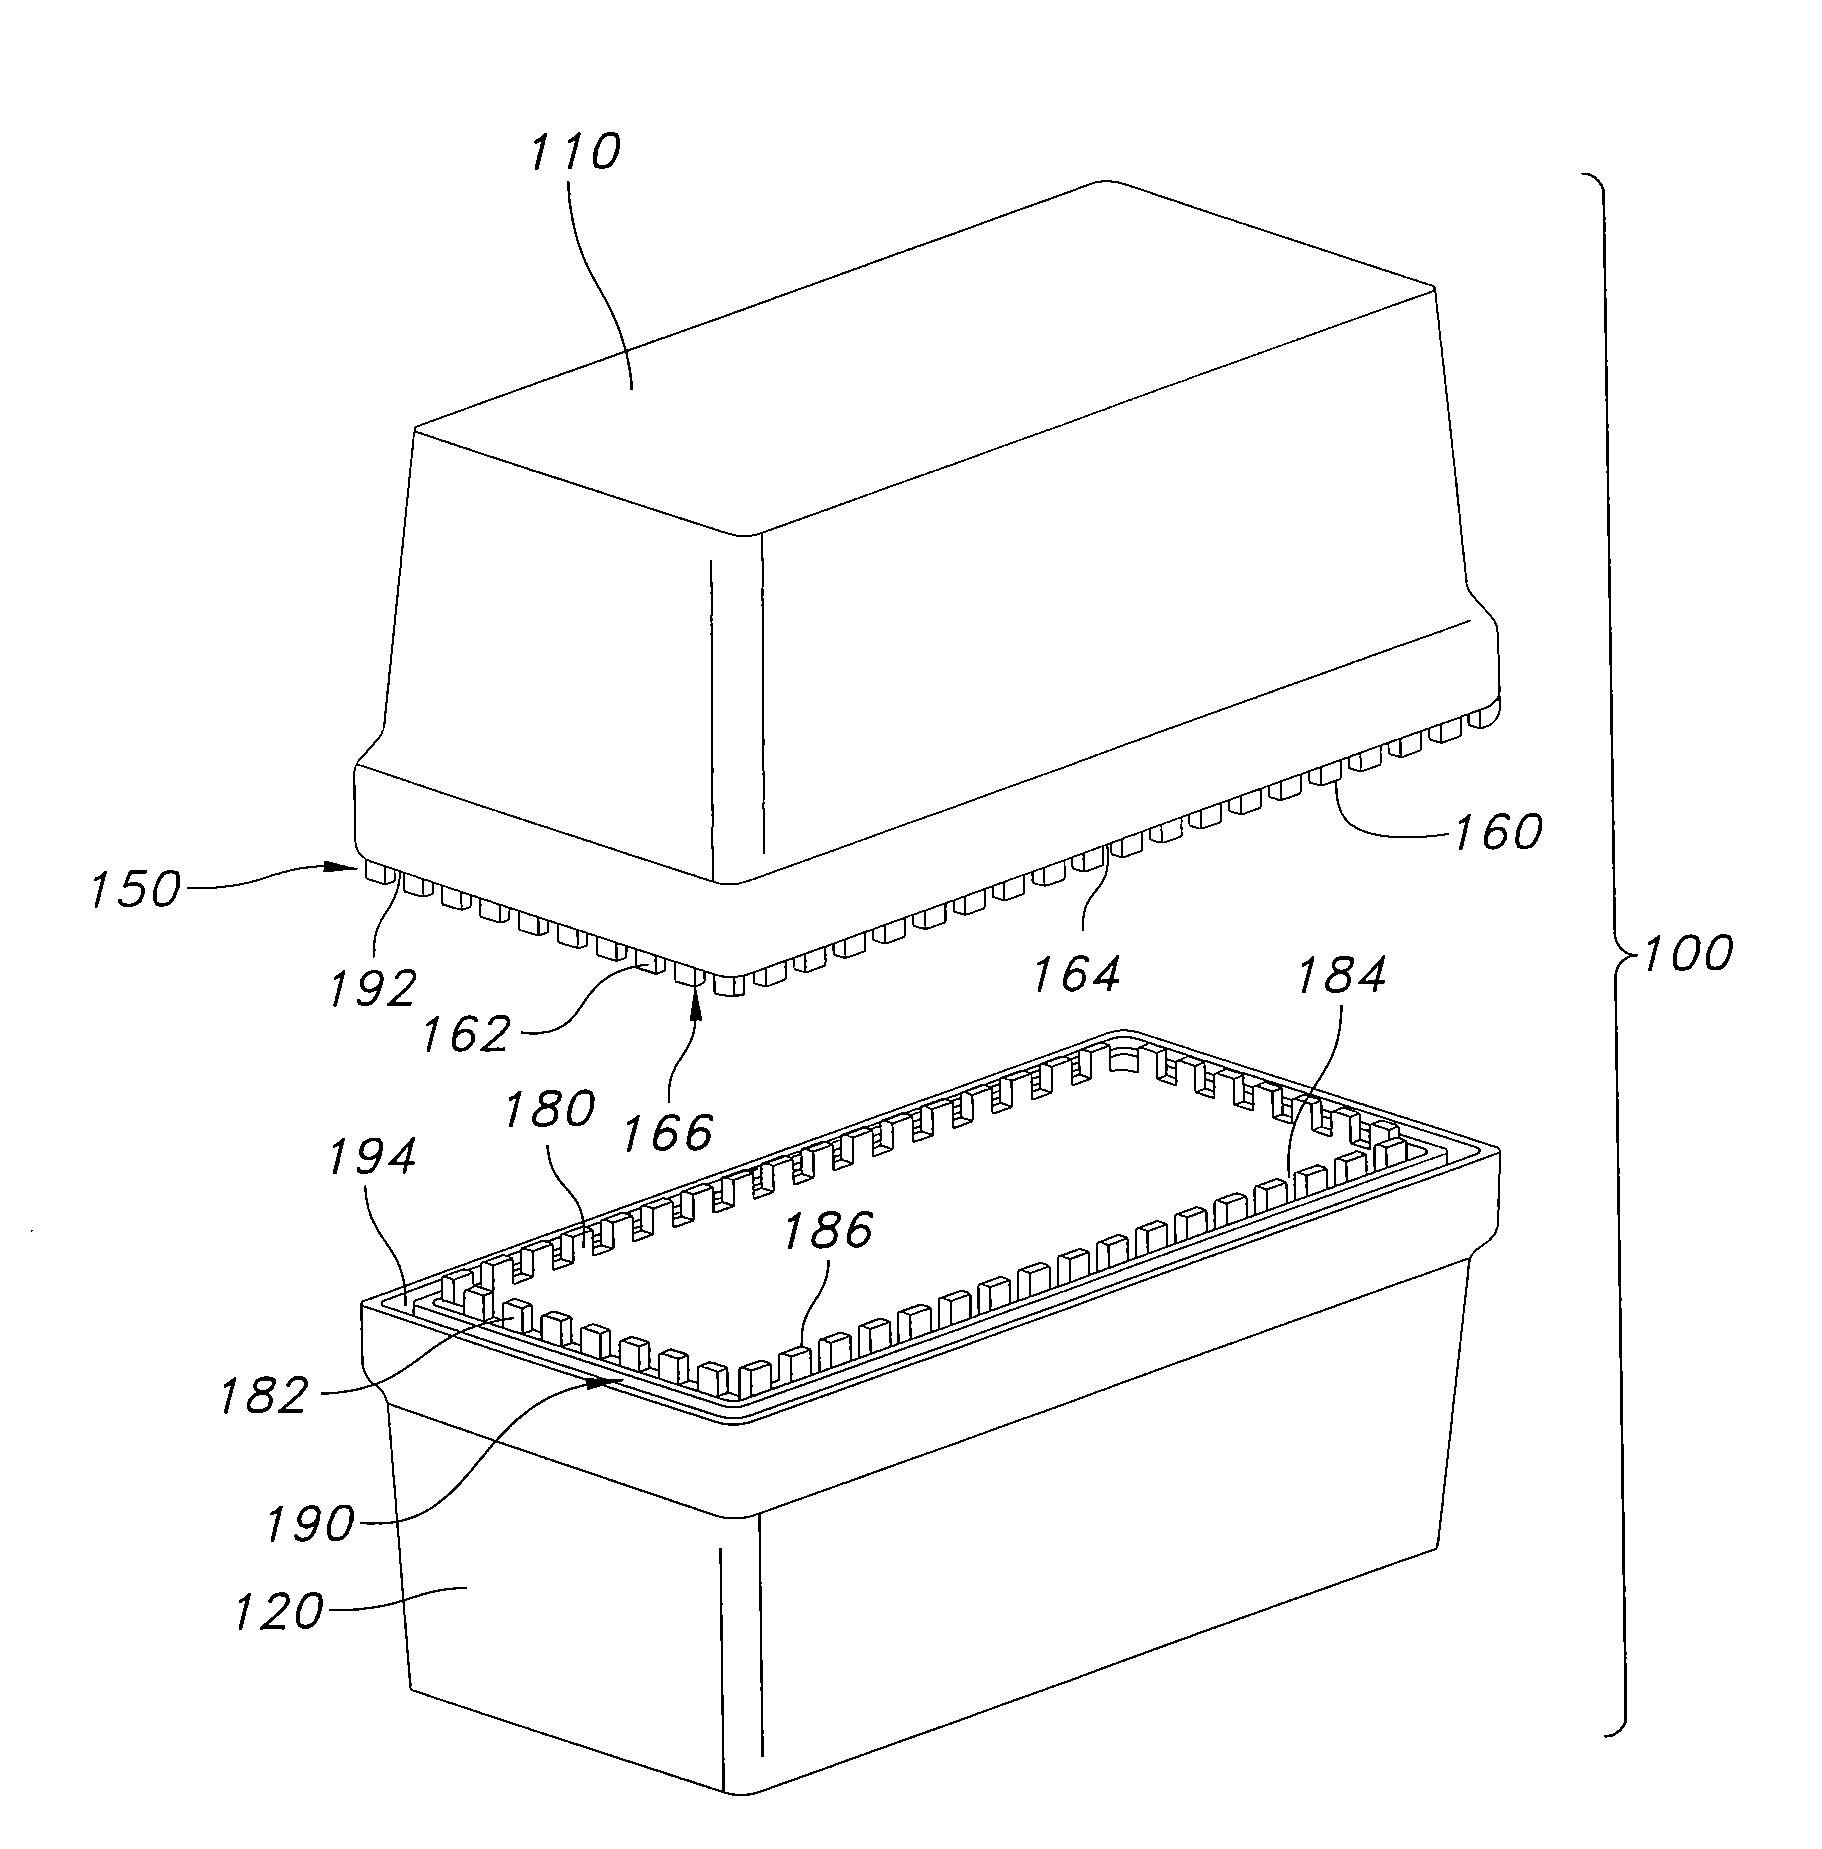 Electro-conductive contact structure for enclosure sealing in housings